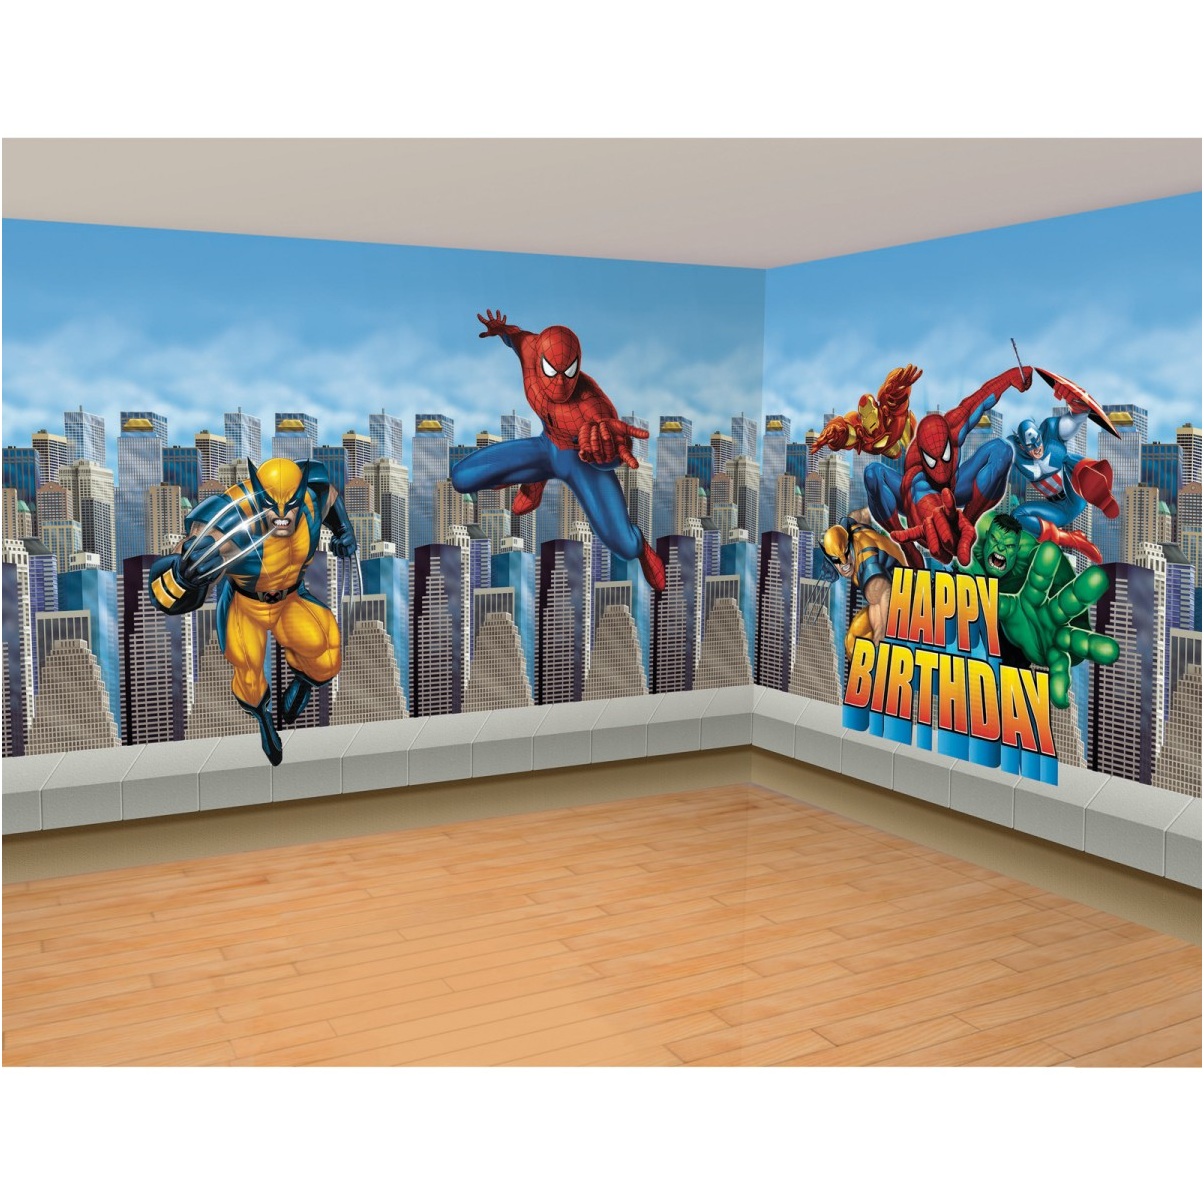 Marvel Super Hero Bedroom Wall Decal Ideas For Kids